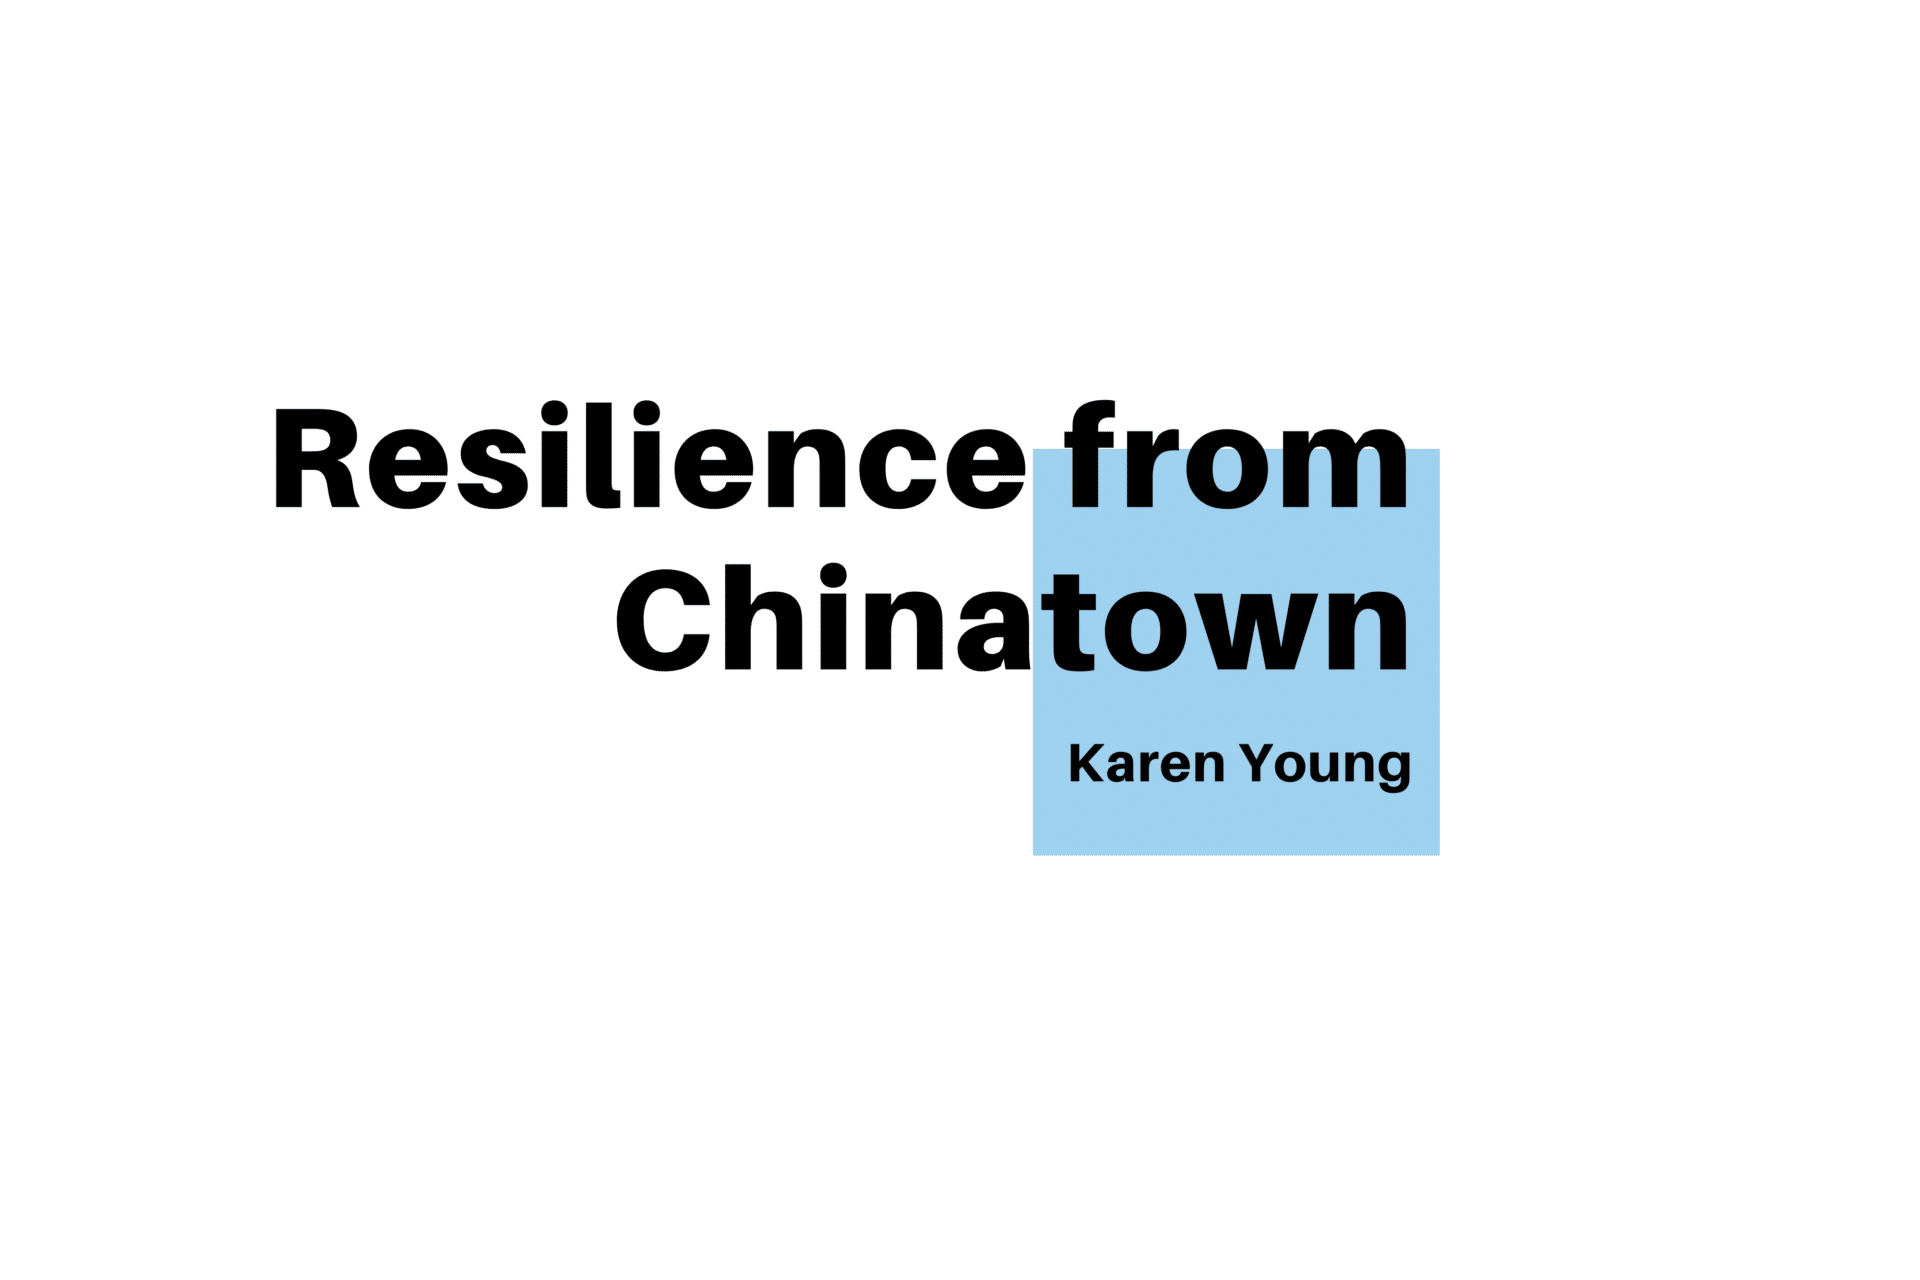 Local Journalism Initiative - Resilience from Chinatown - title card